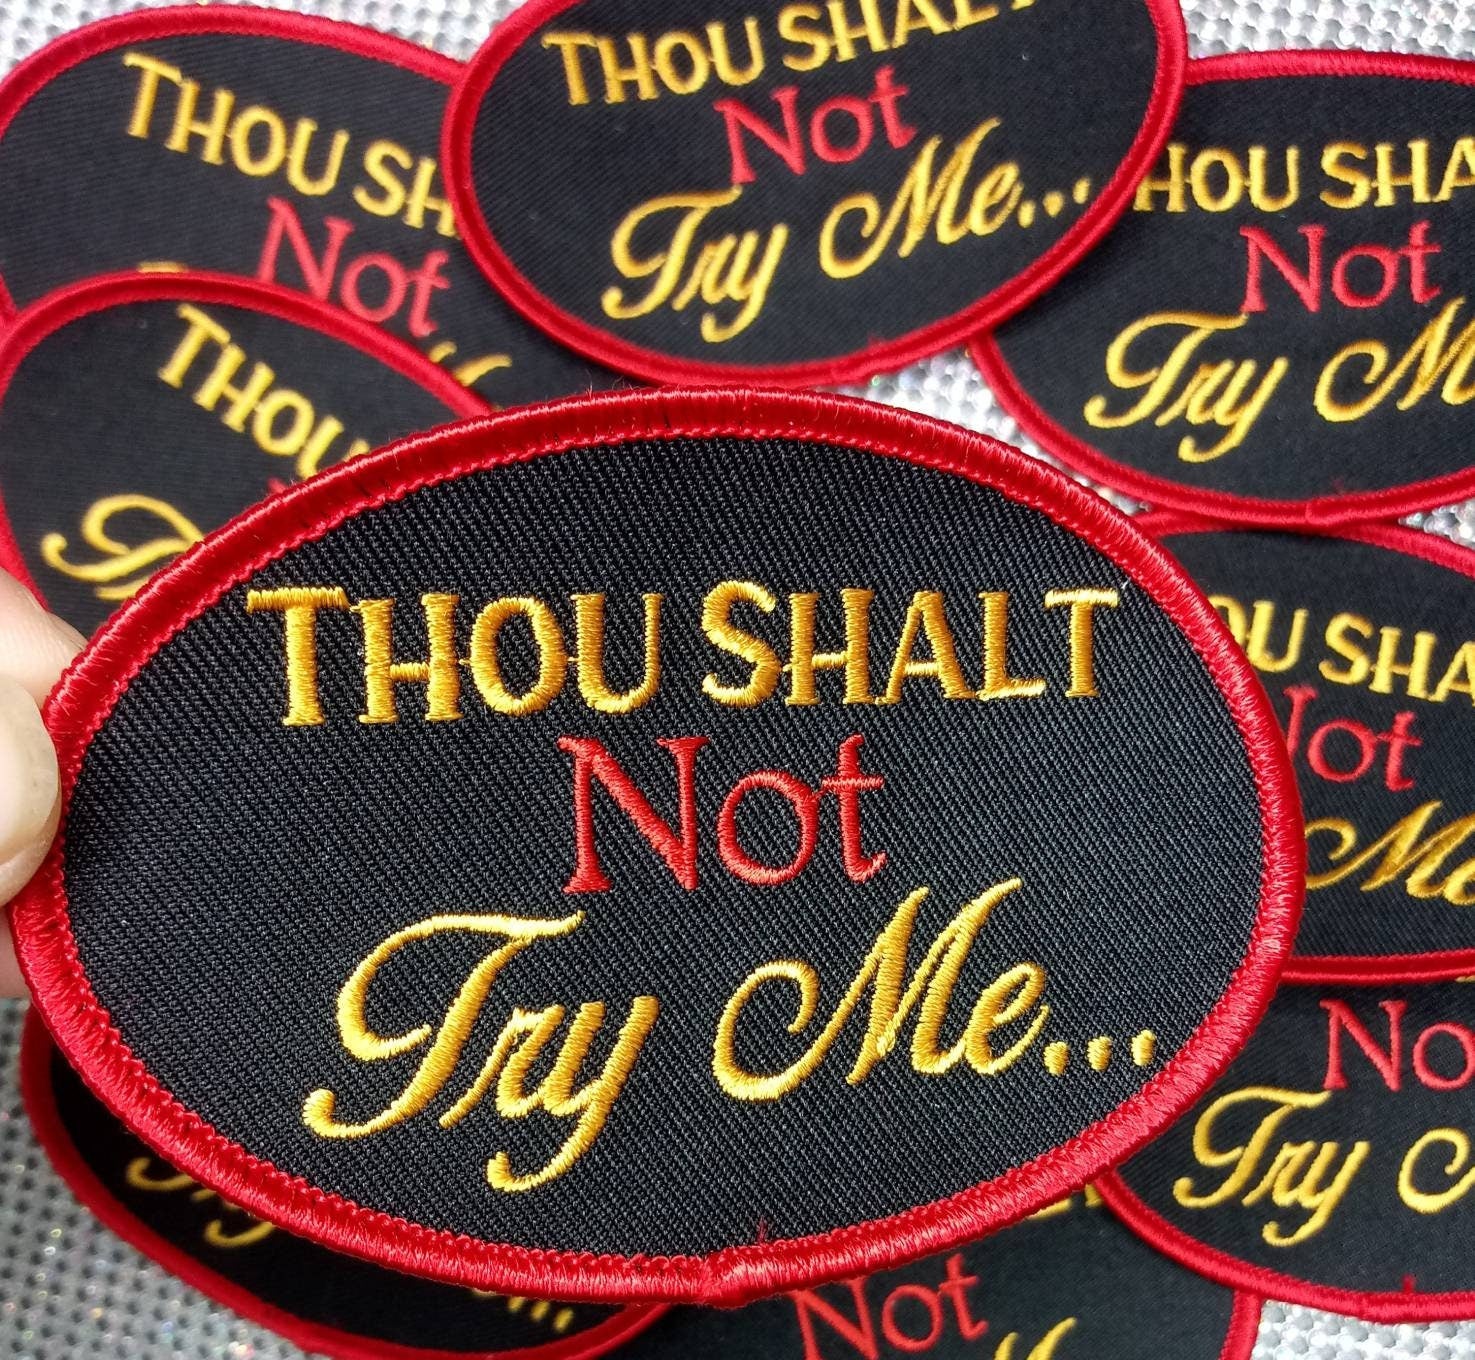 Mood 24:7, "Thou Shalt Not Try Me" 3-inch, Embroidered Patch, Fun Appliques, Iron or Sew On Patches, Cool Patches